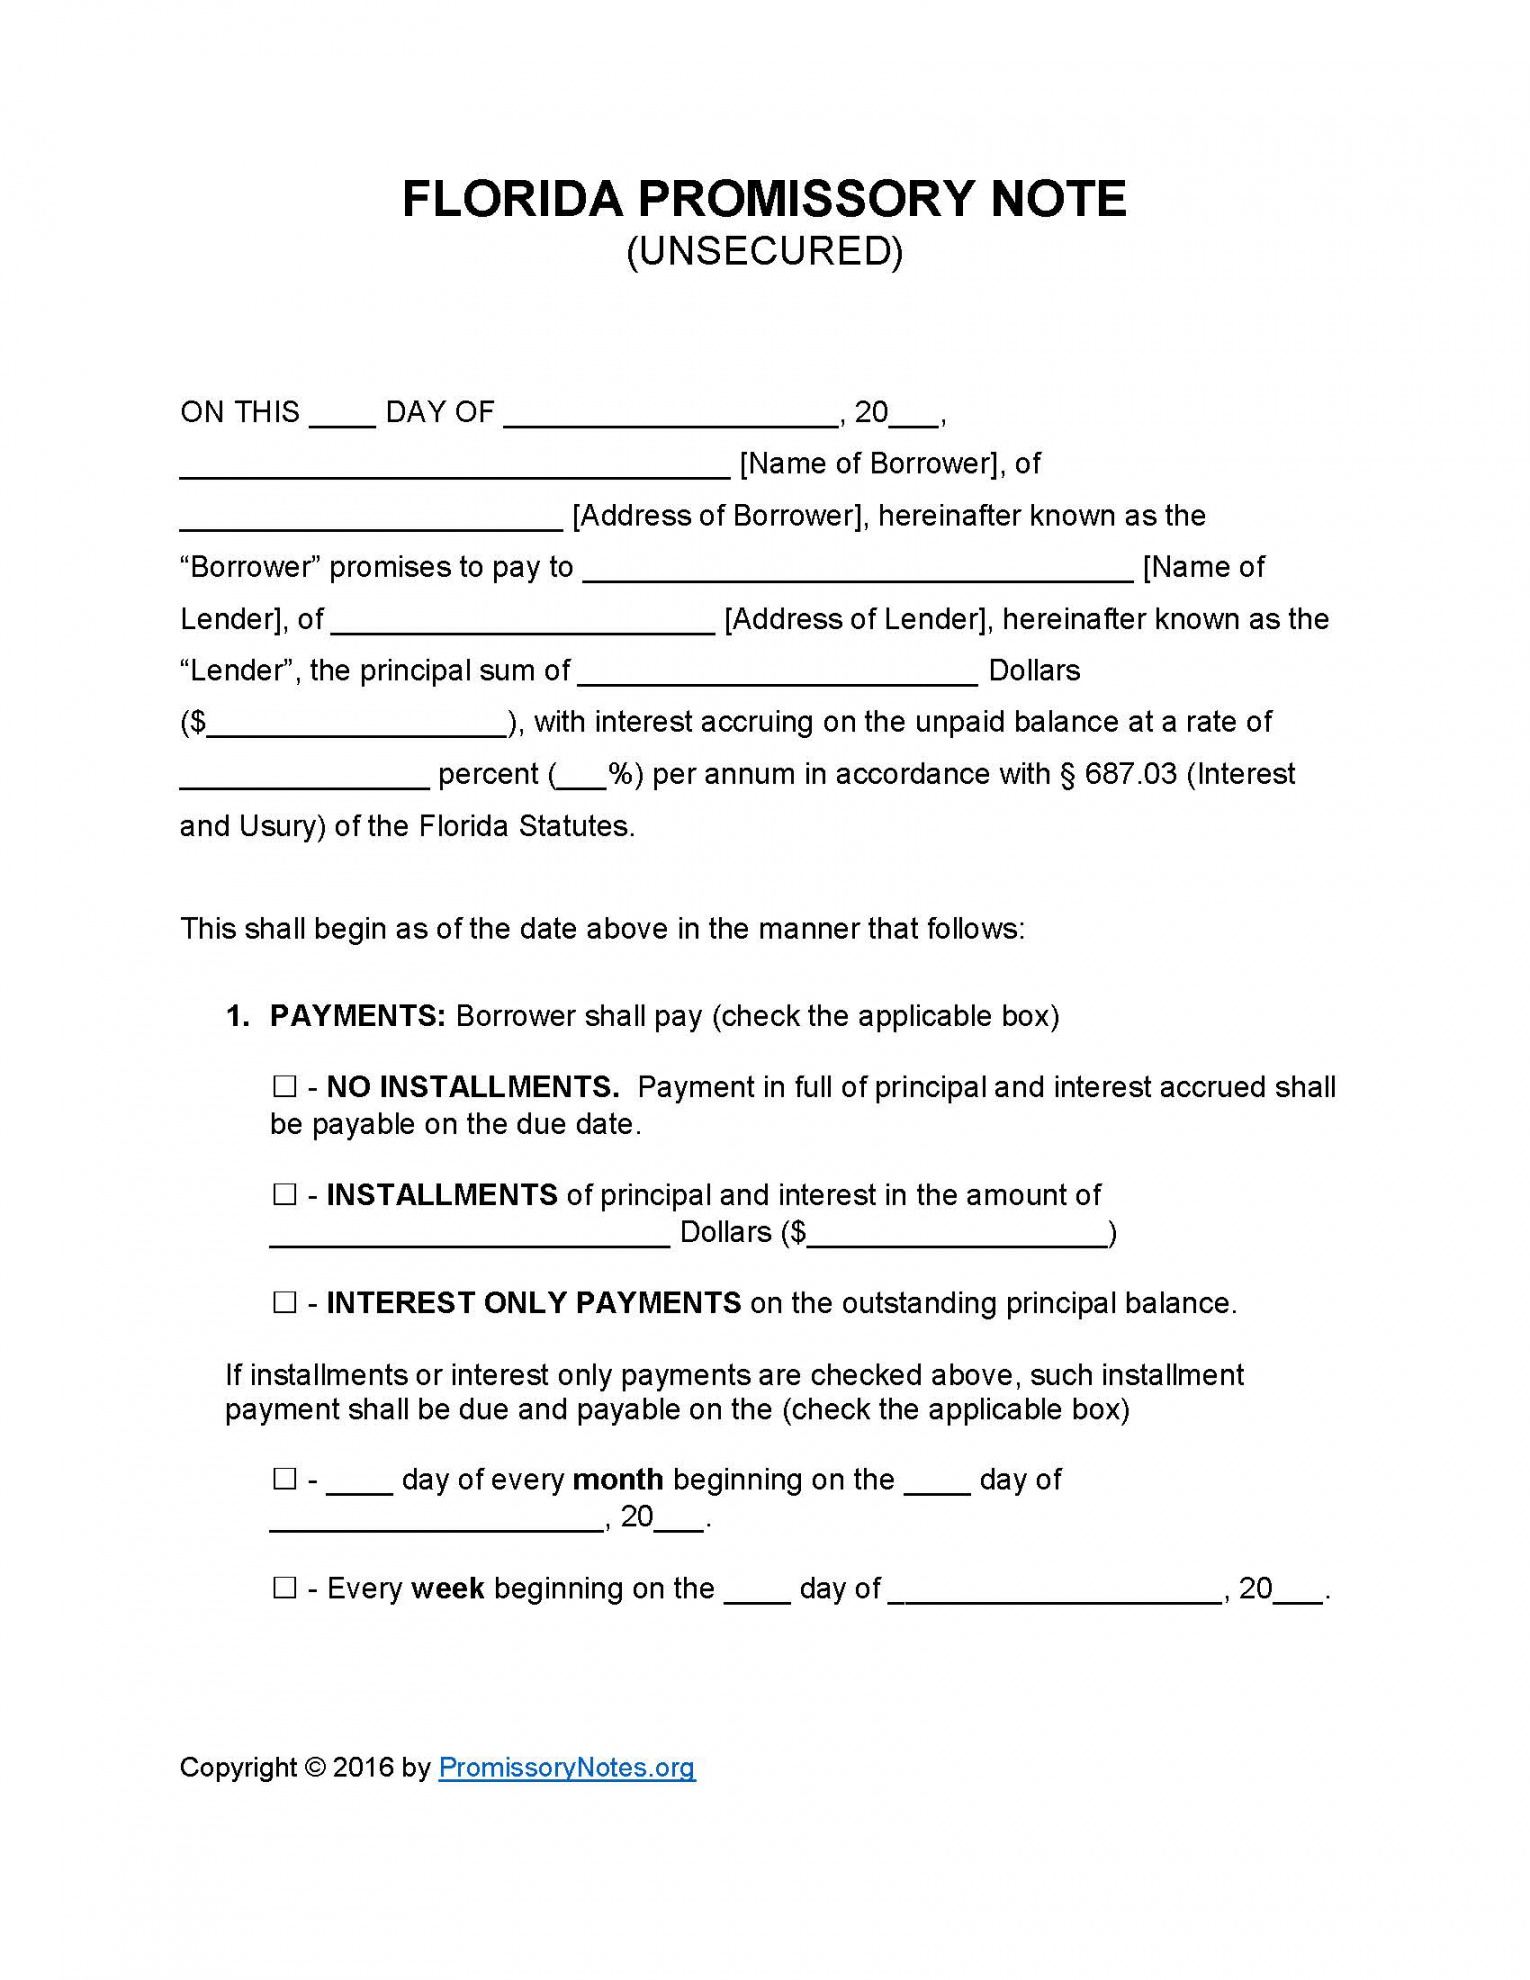 free florida unsecured promissory note template  promissory florida promissory note template word